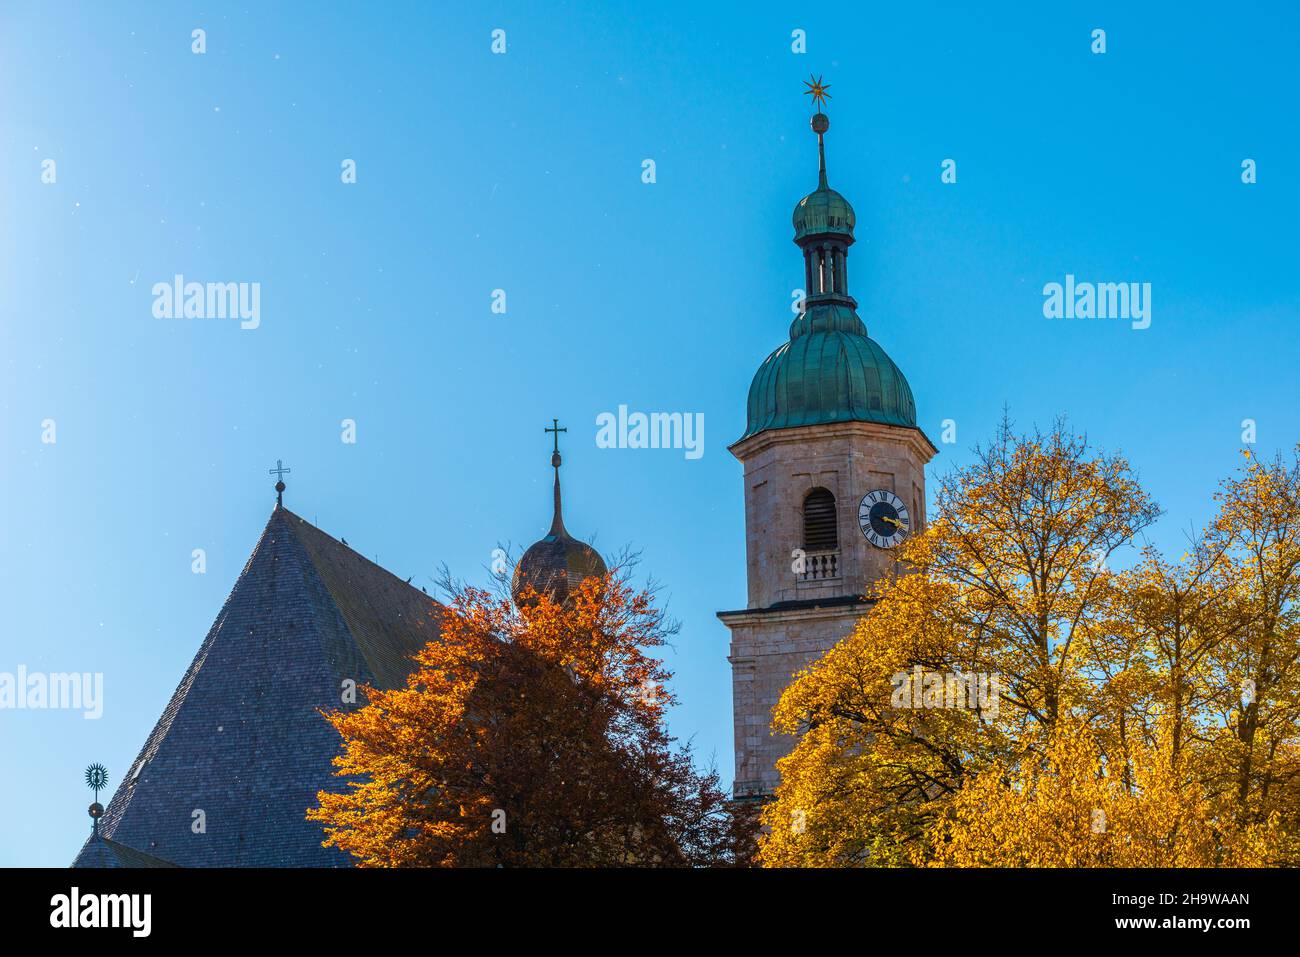 Historic monument and listed building Monastery Franziskanerkloster and tower of Franciscan Church, Berchtesgaden, Upper Bavaria, Southern Germany Stock Photo